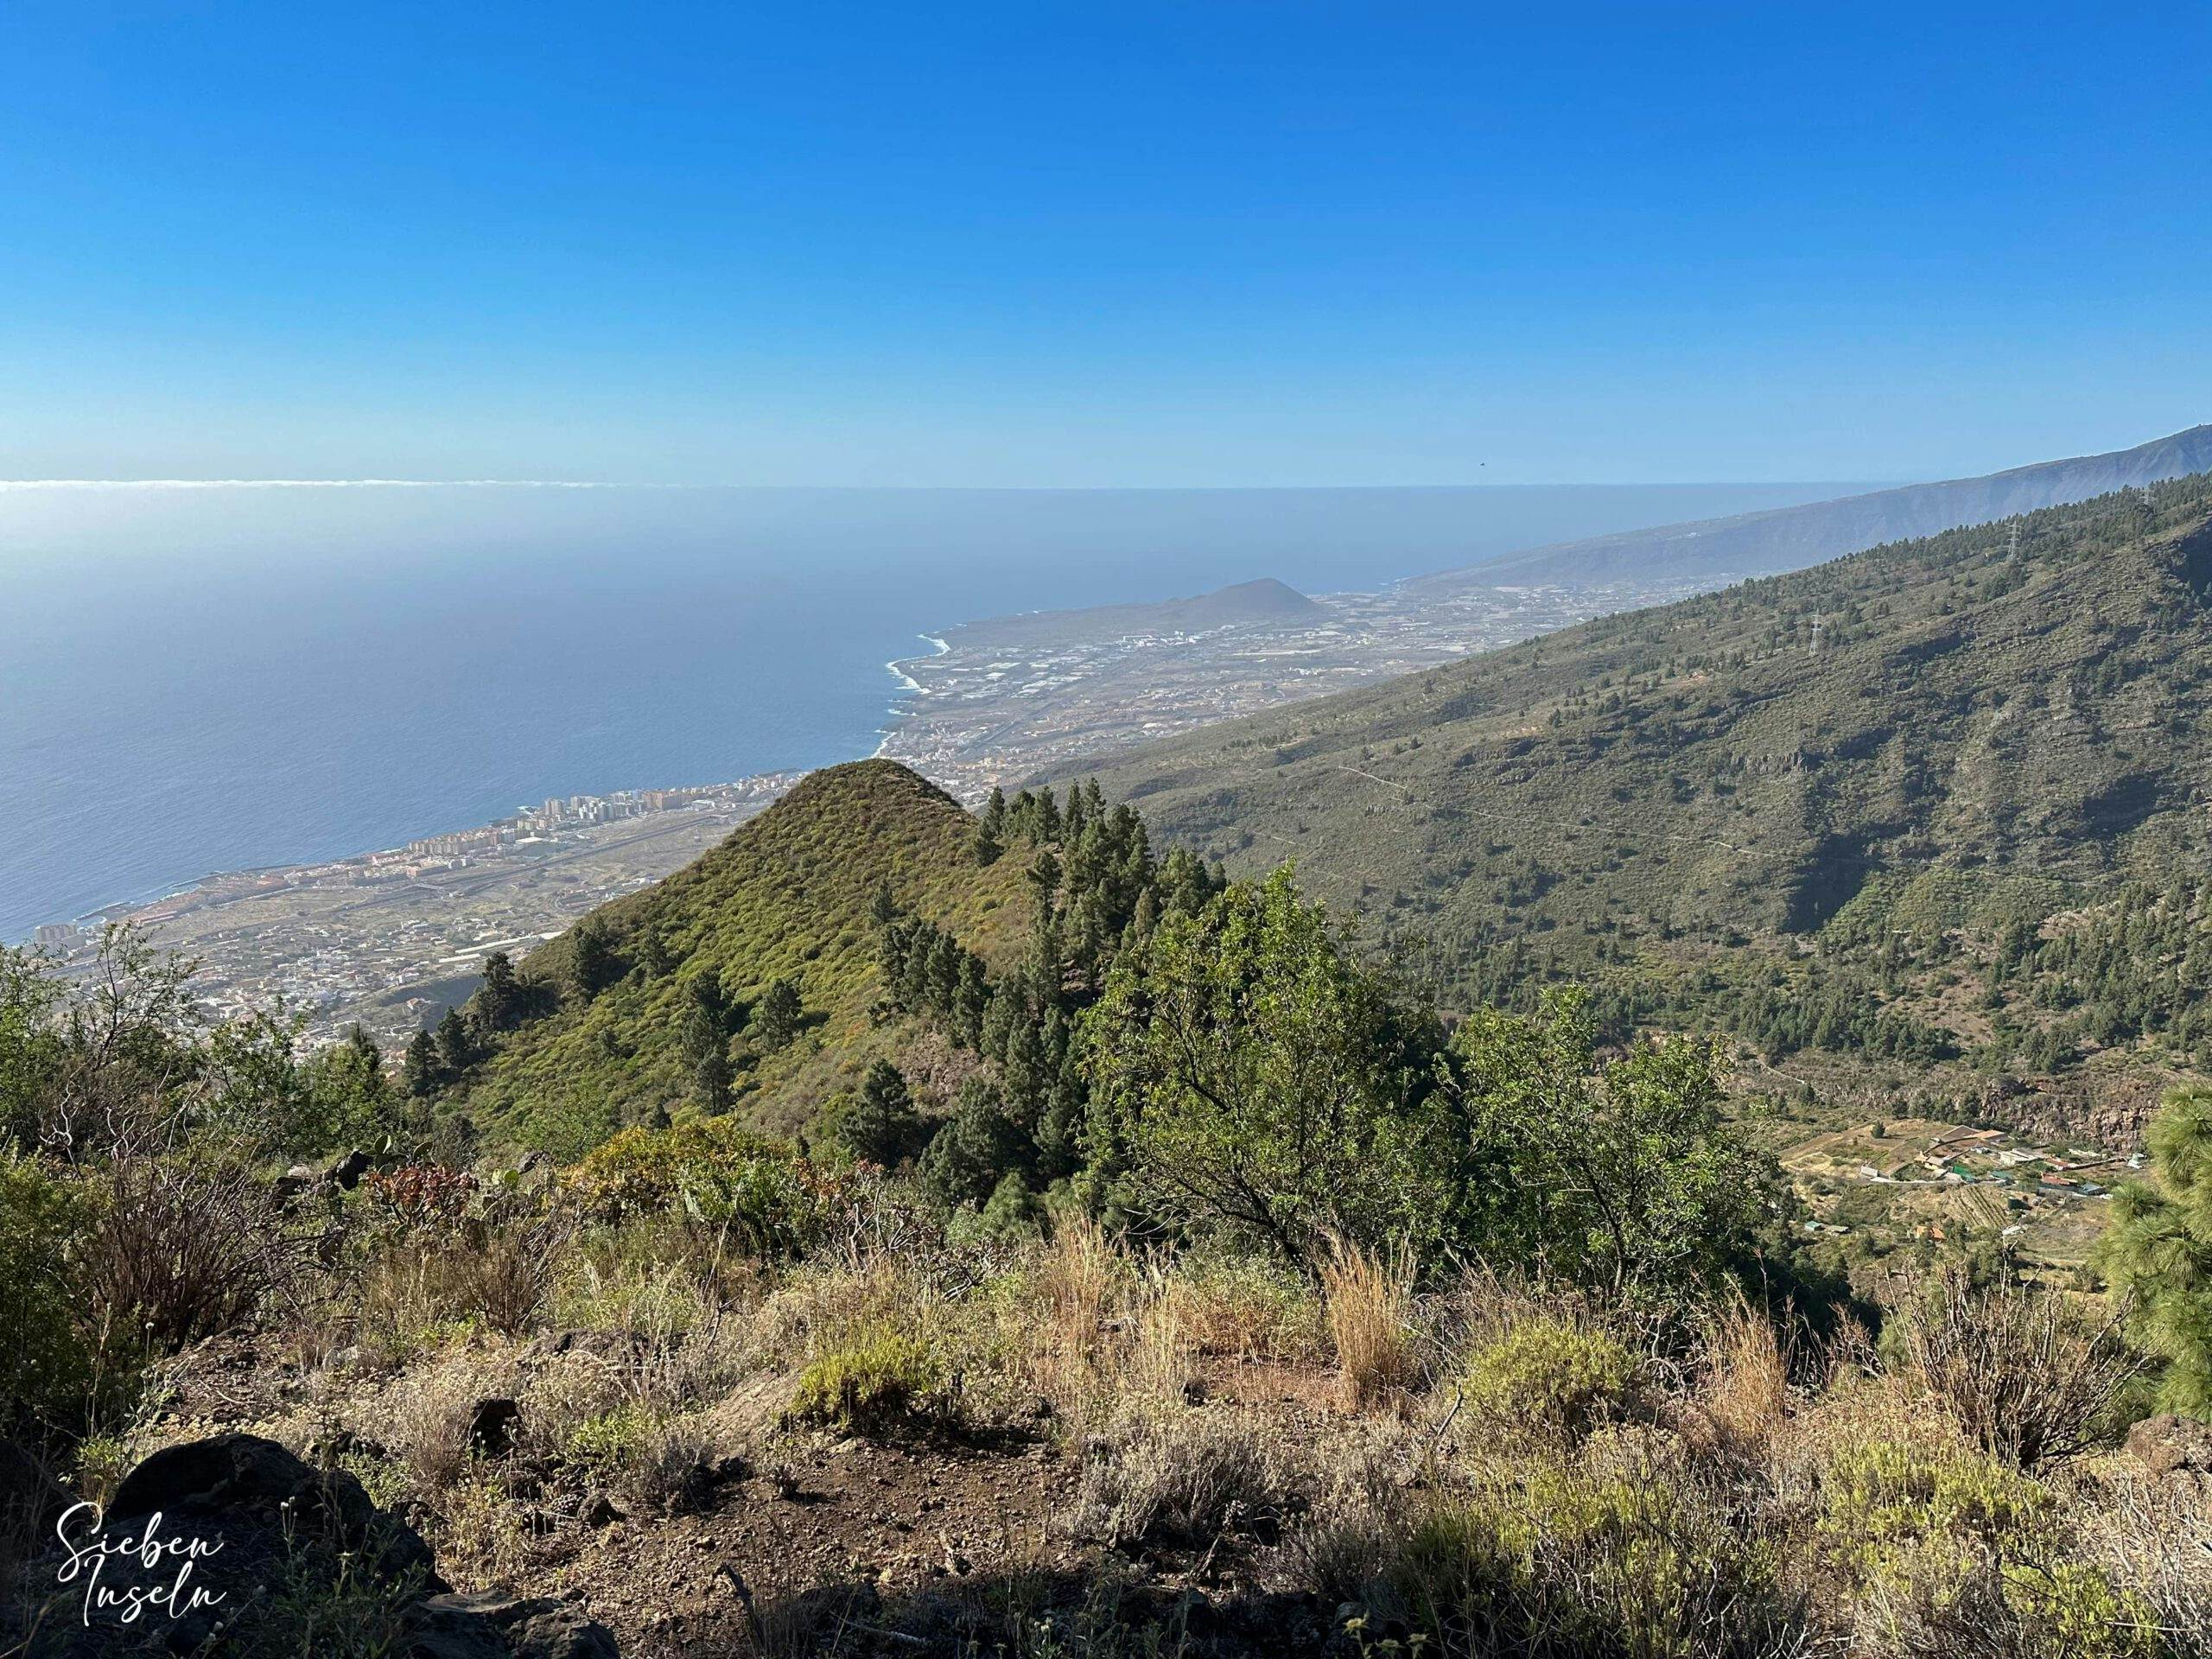 View from the higher ridge path to the east coast of Tenerife and the Atlantic Ocean